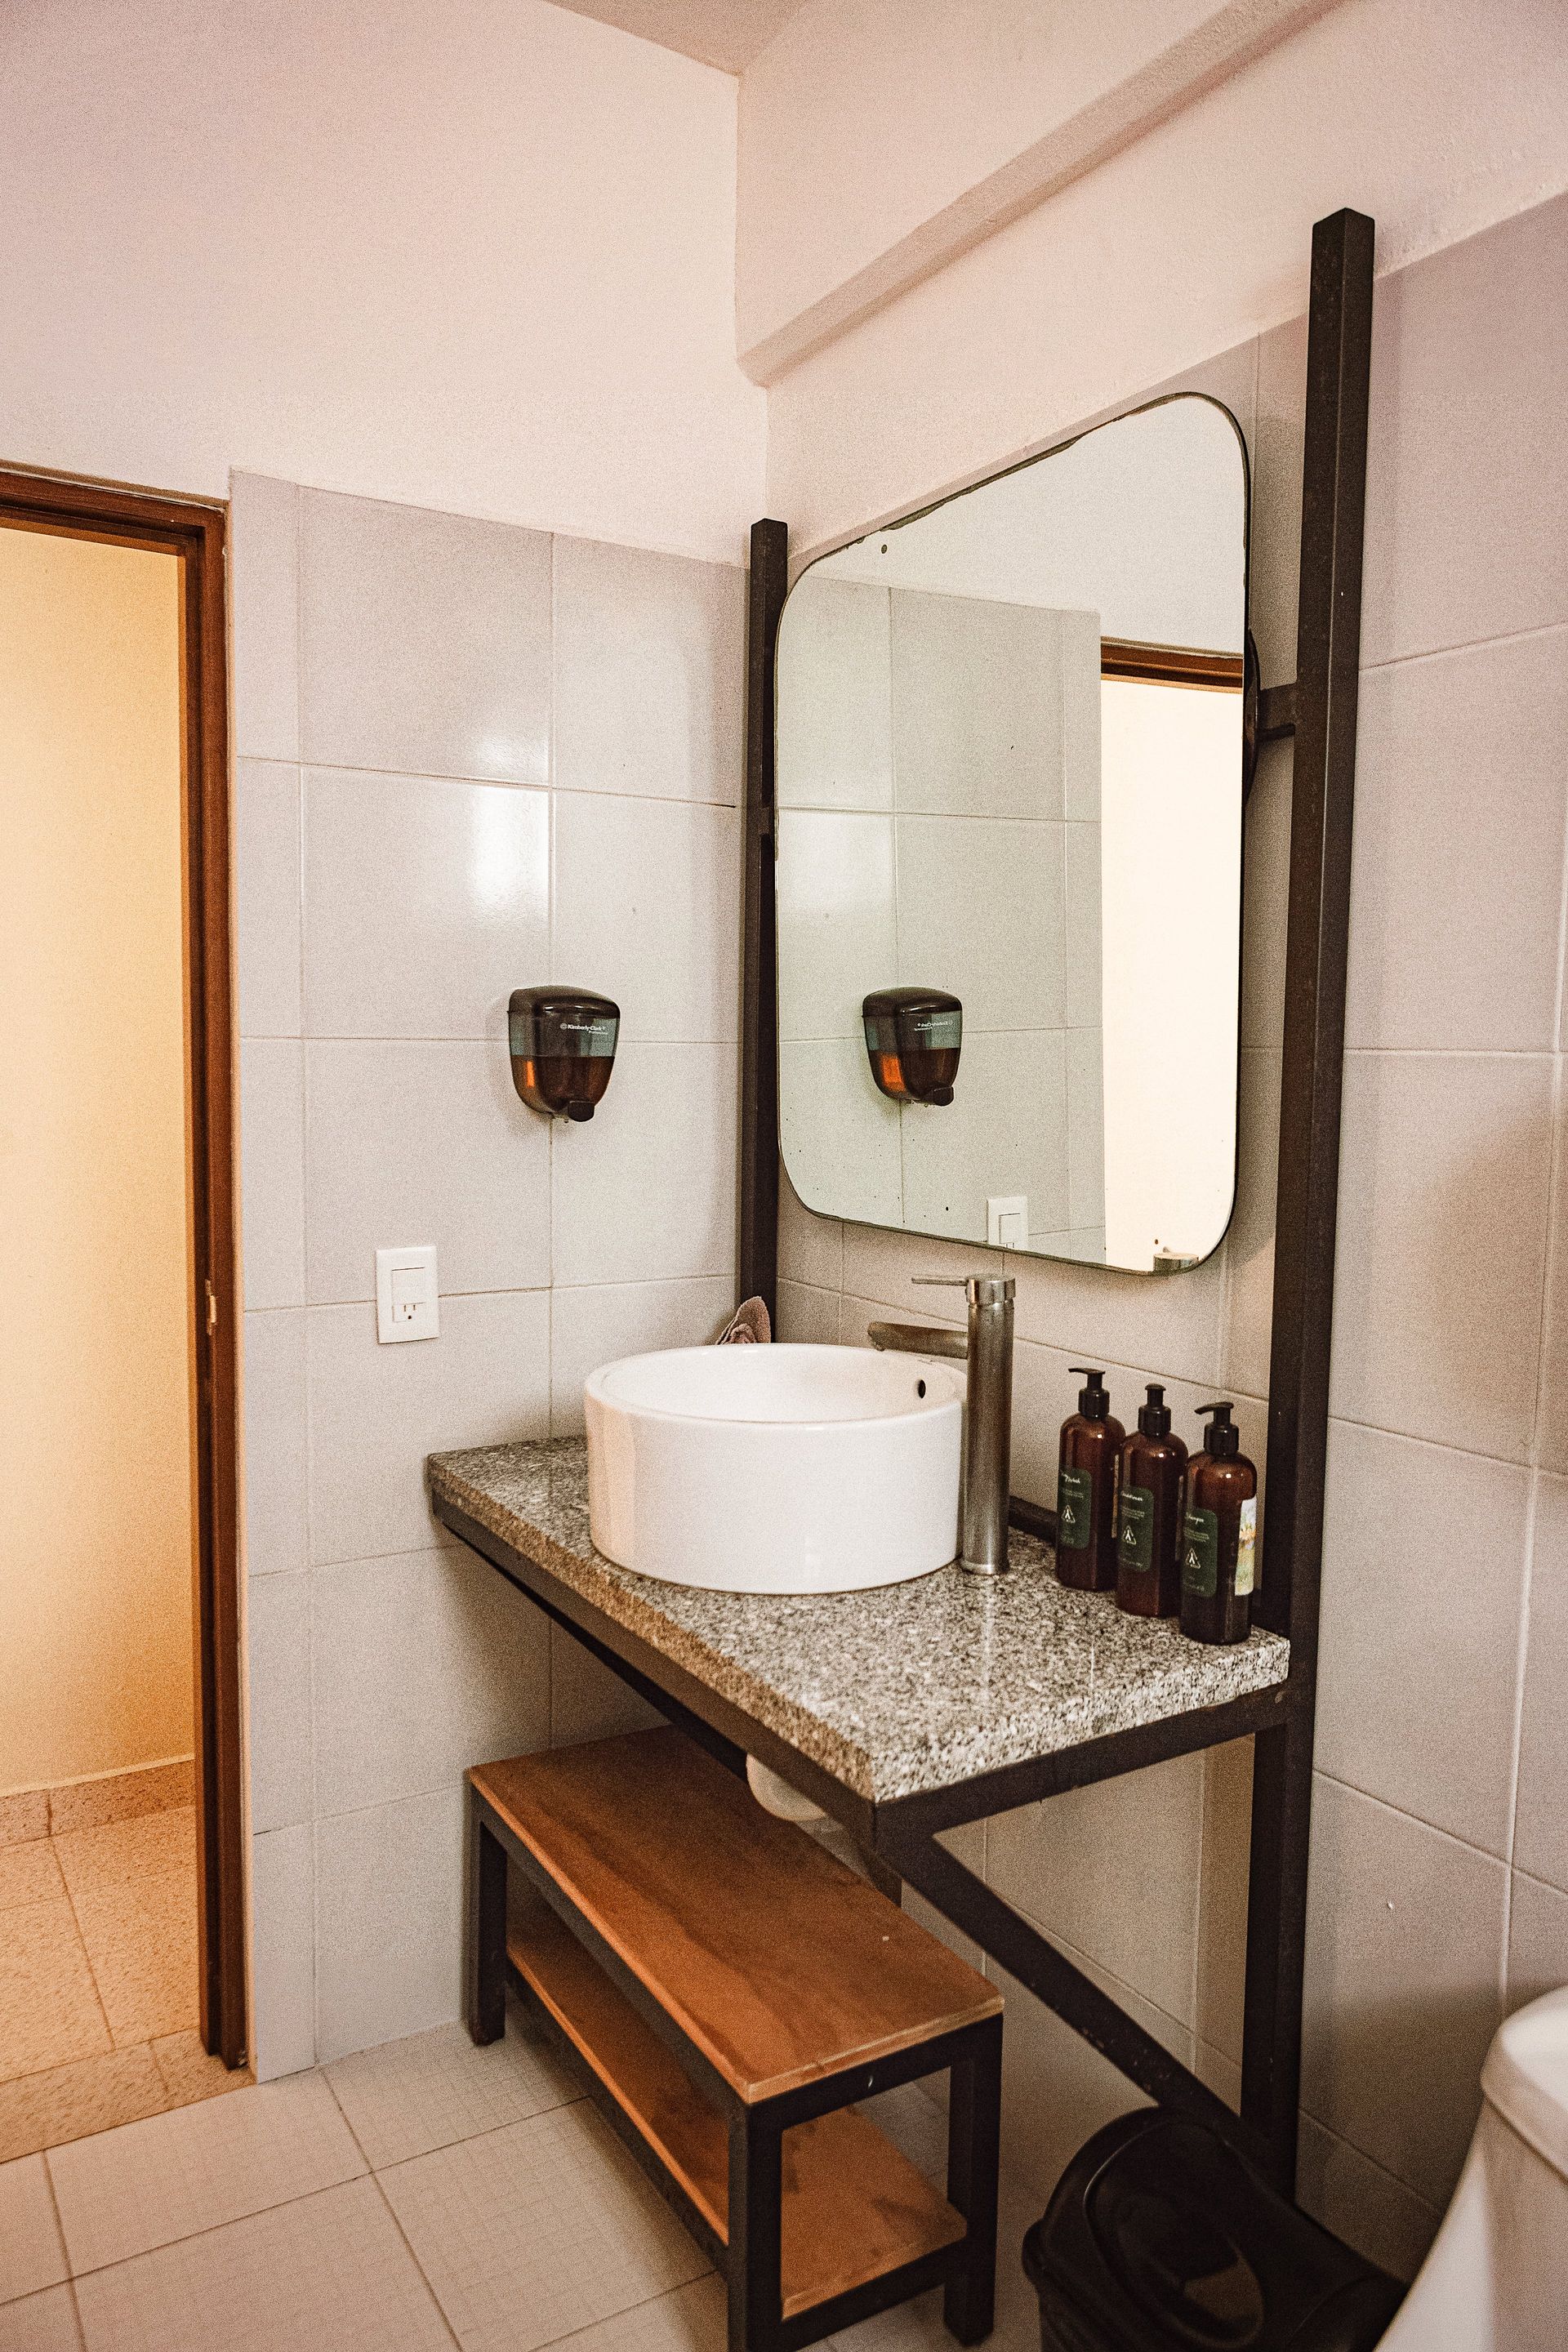 A bathroom with a sink , mirror and soap dispensers